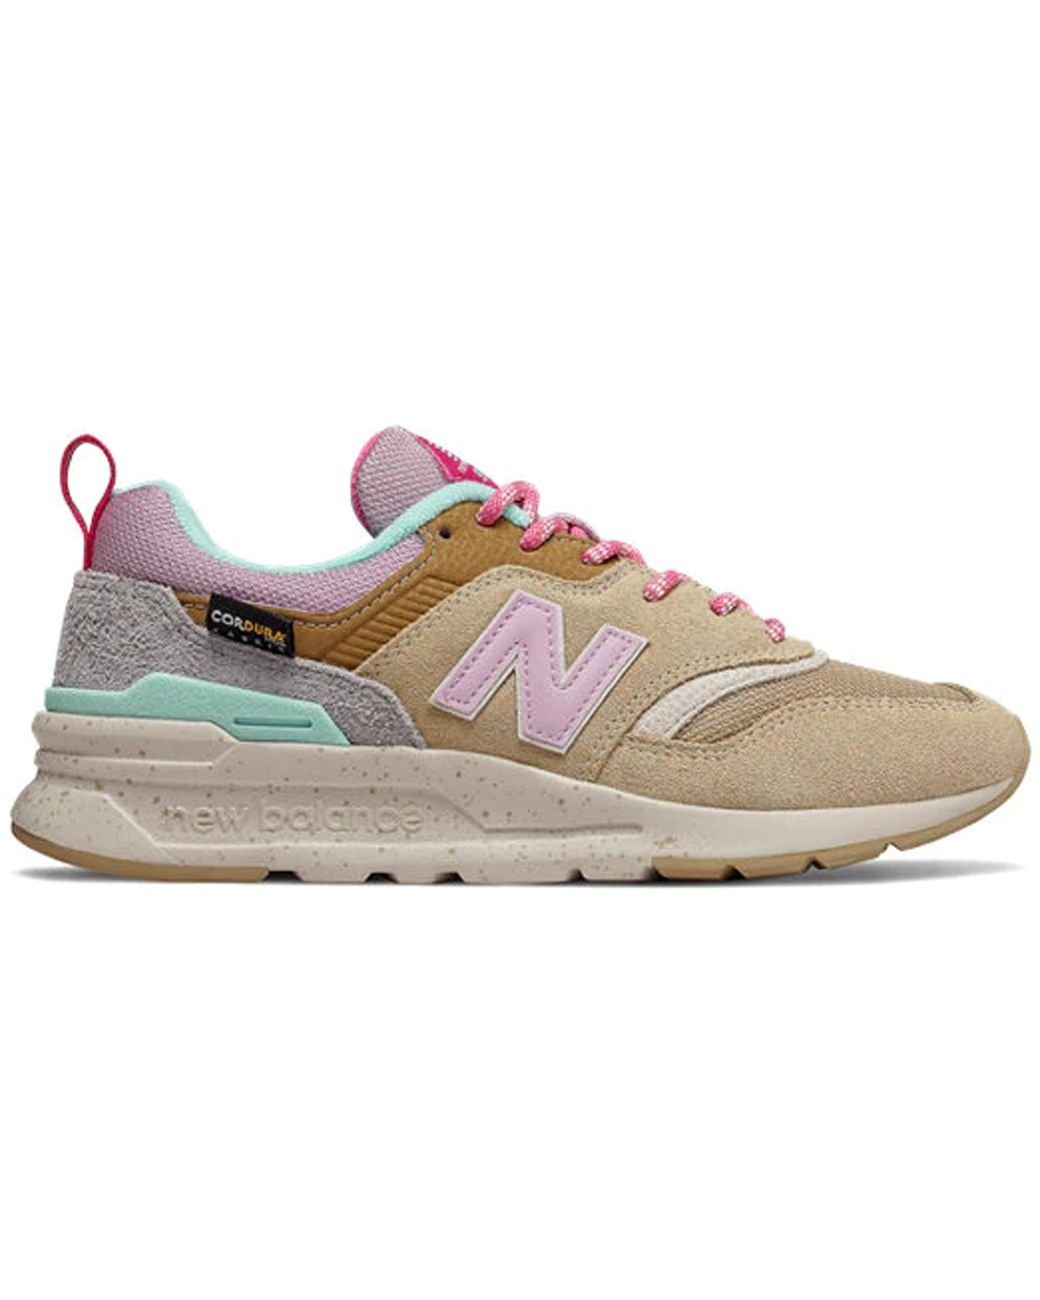 New Balance 997 Outdoor Pack (w) in 